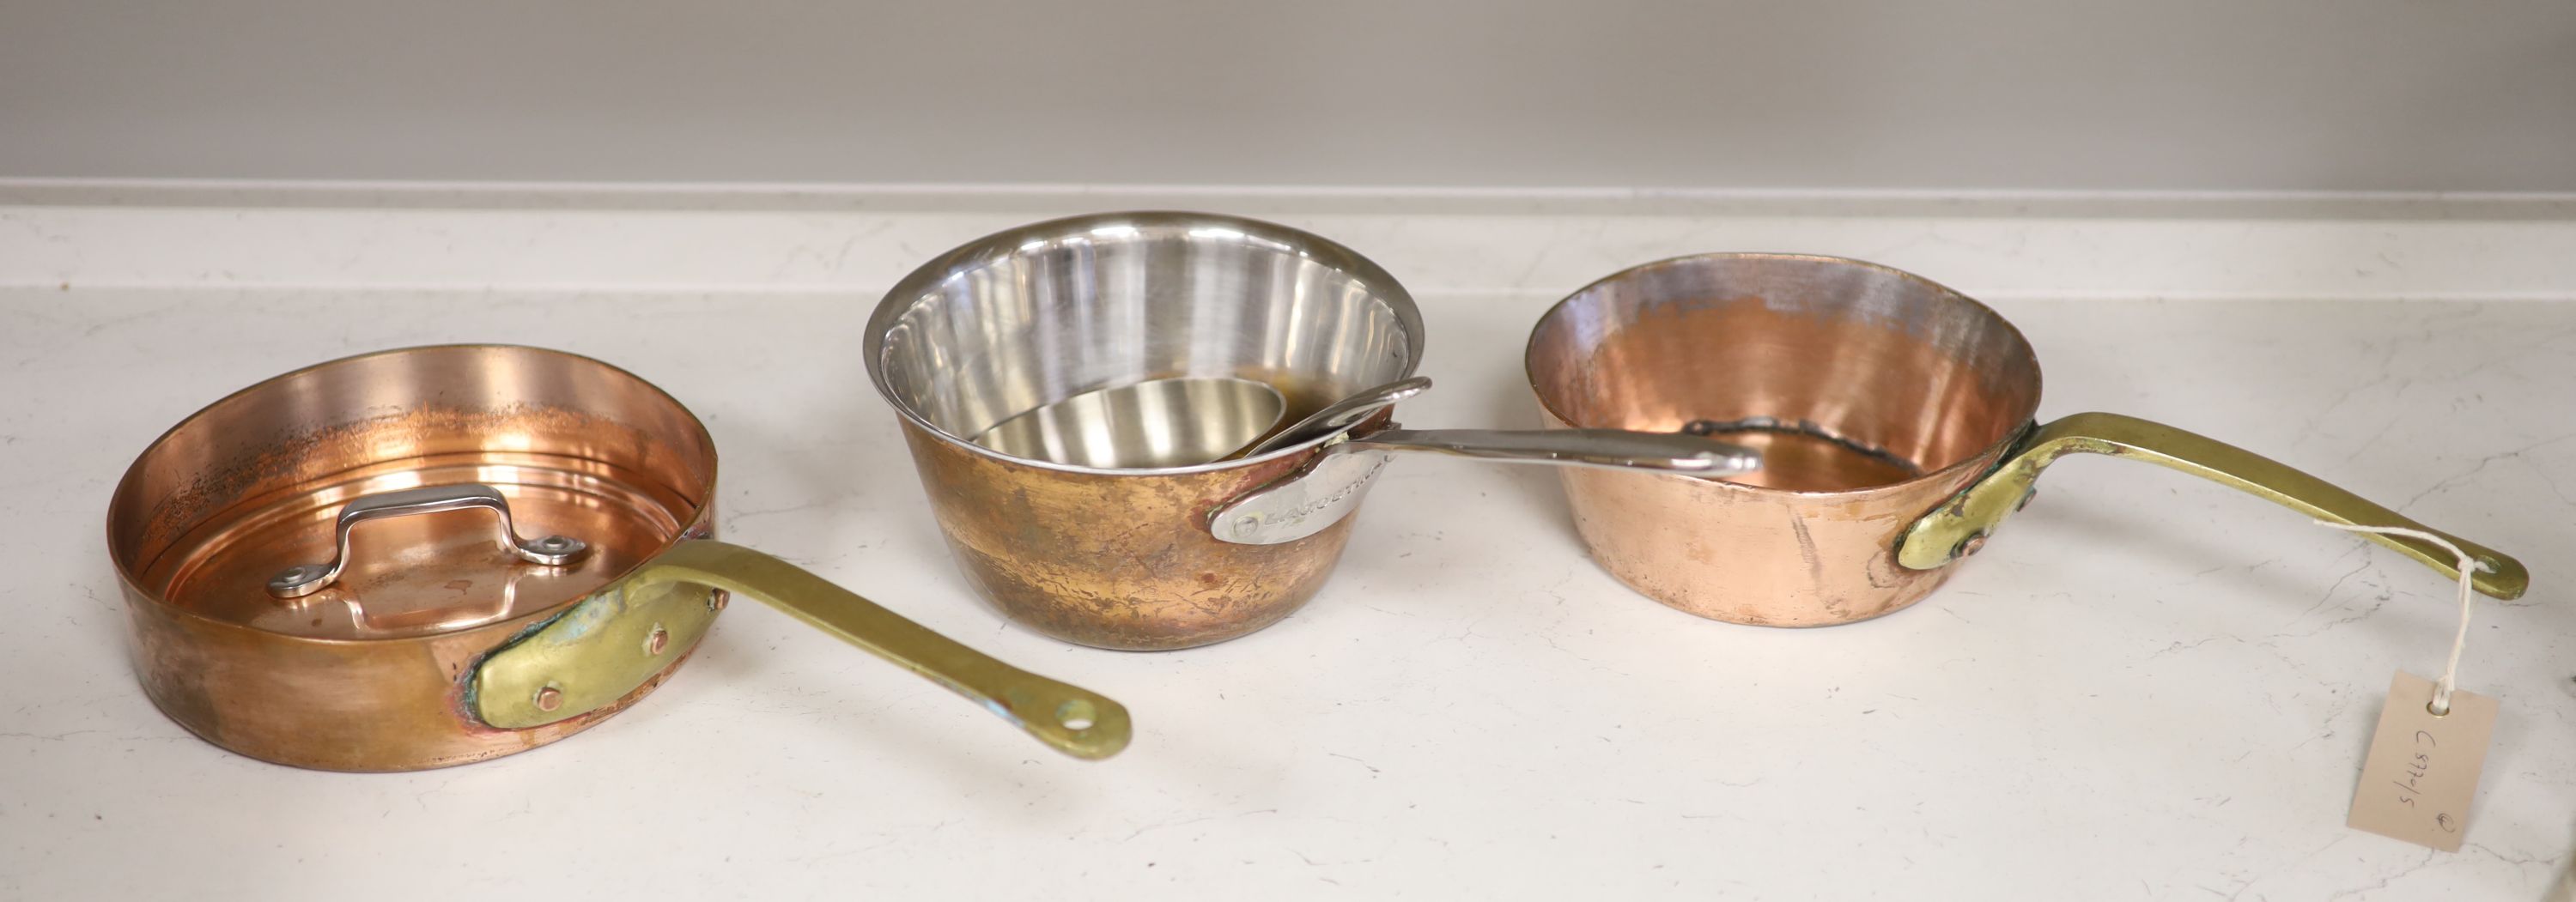 Four French copper pans